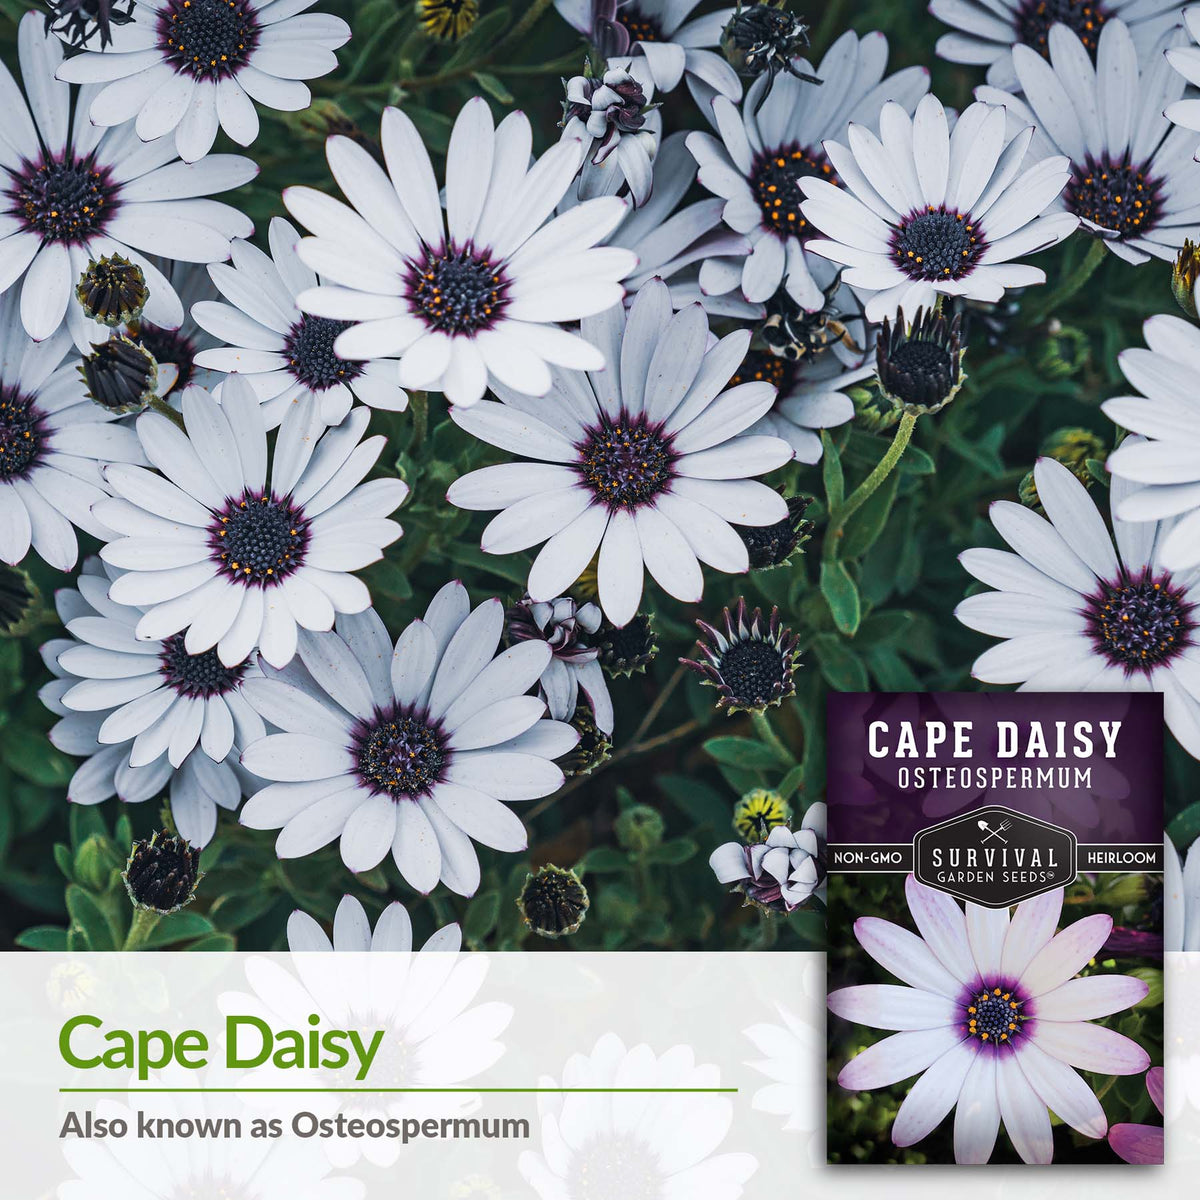 Cape Daisy is also known as Osteospermum